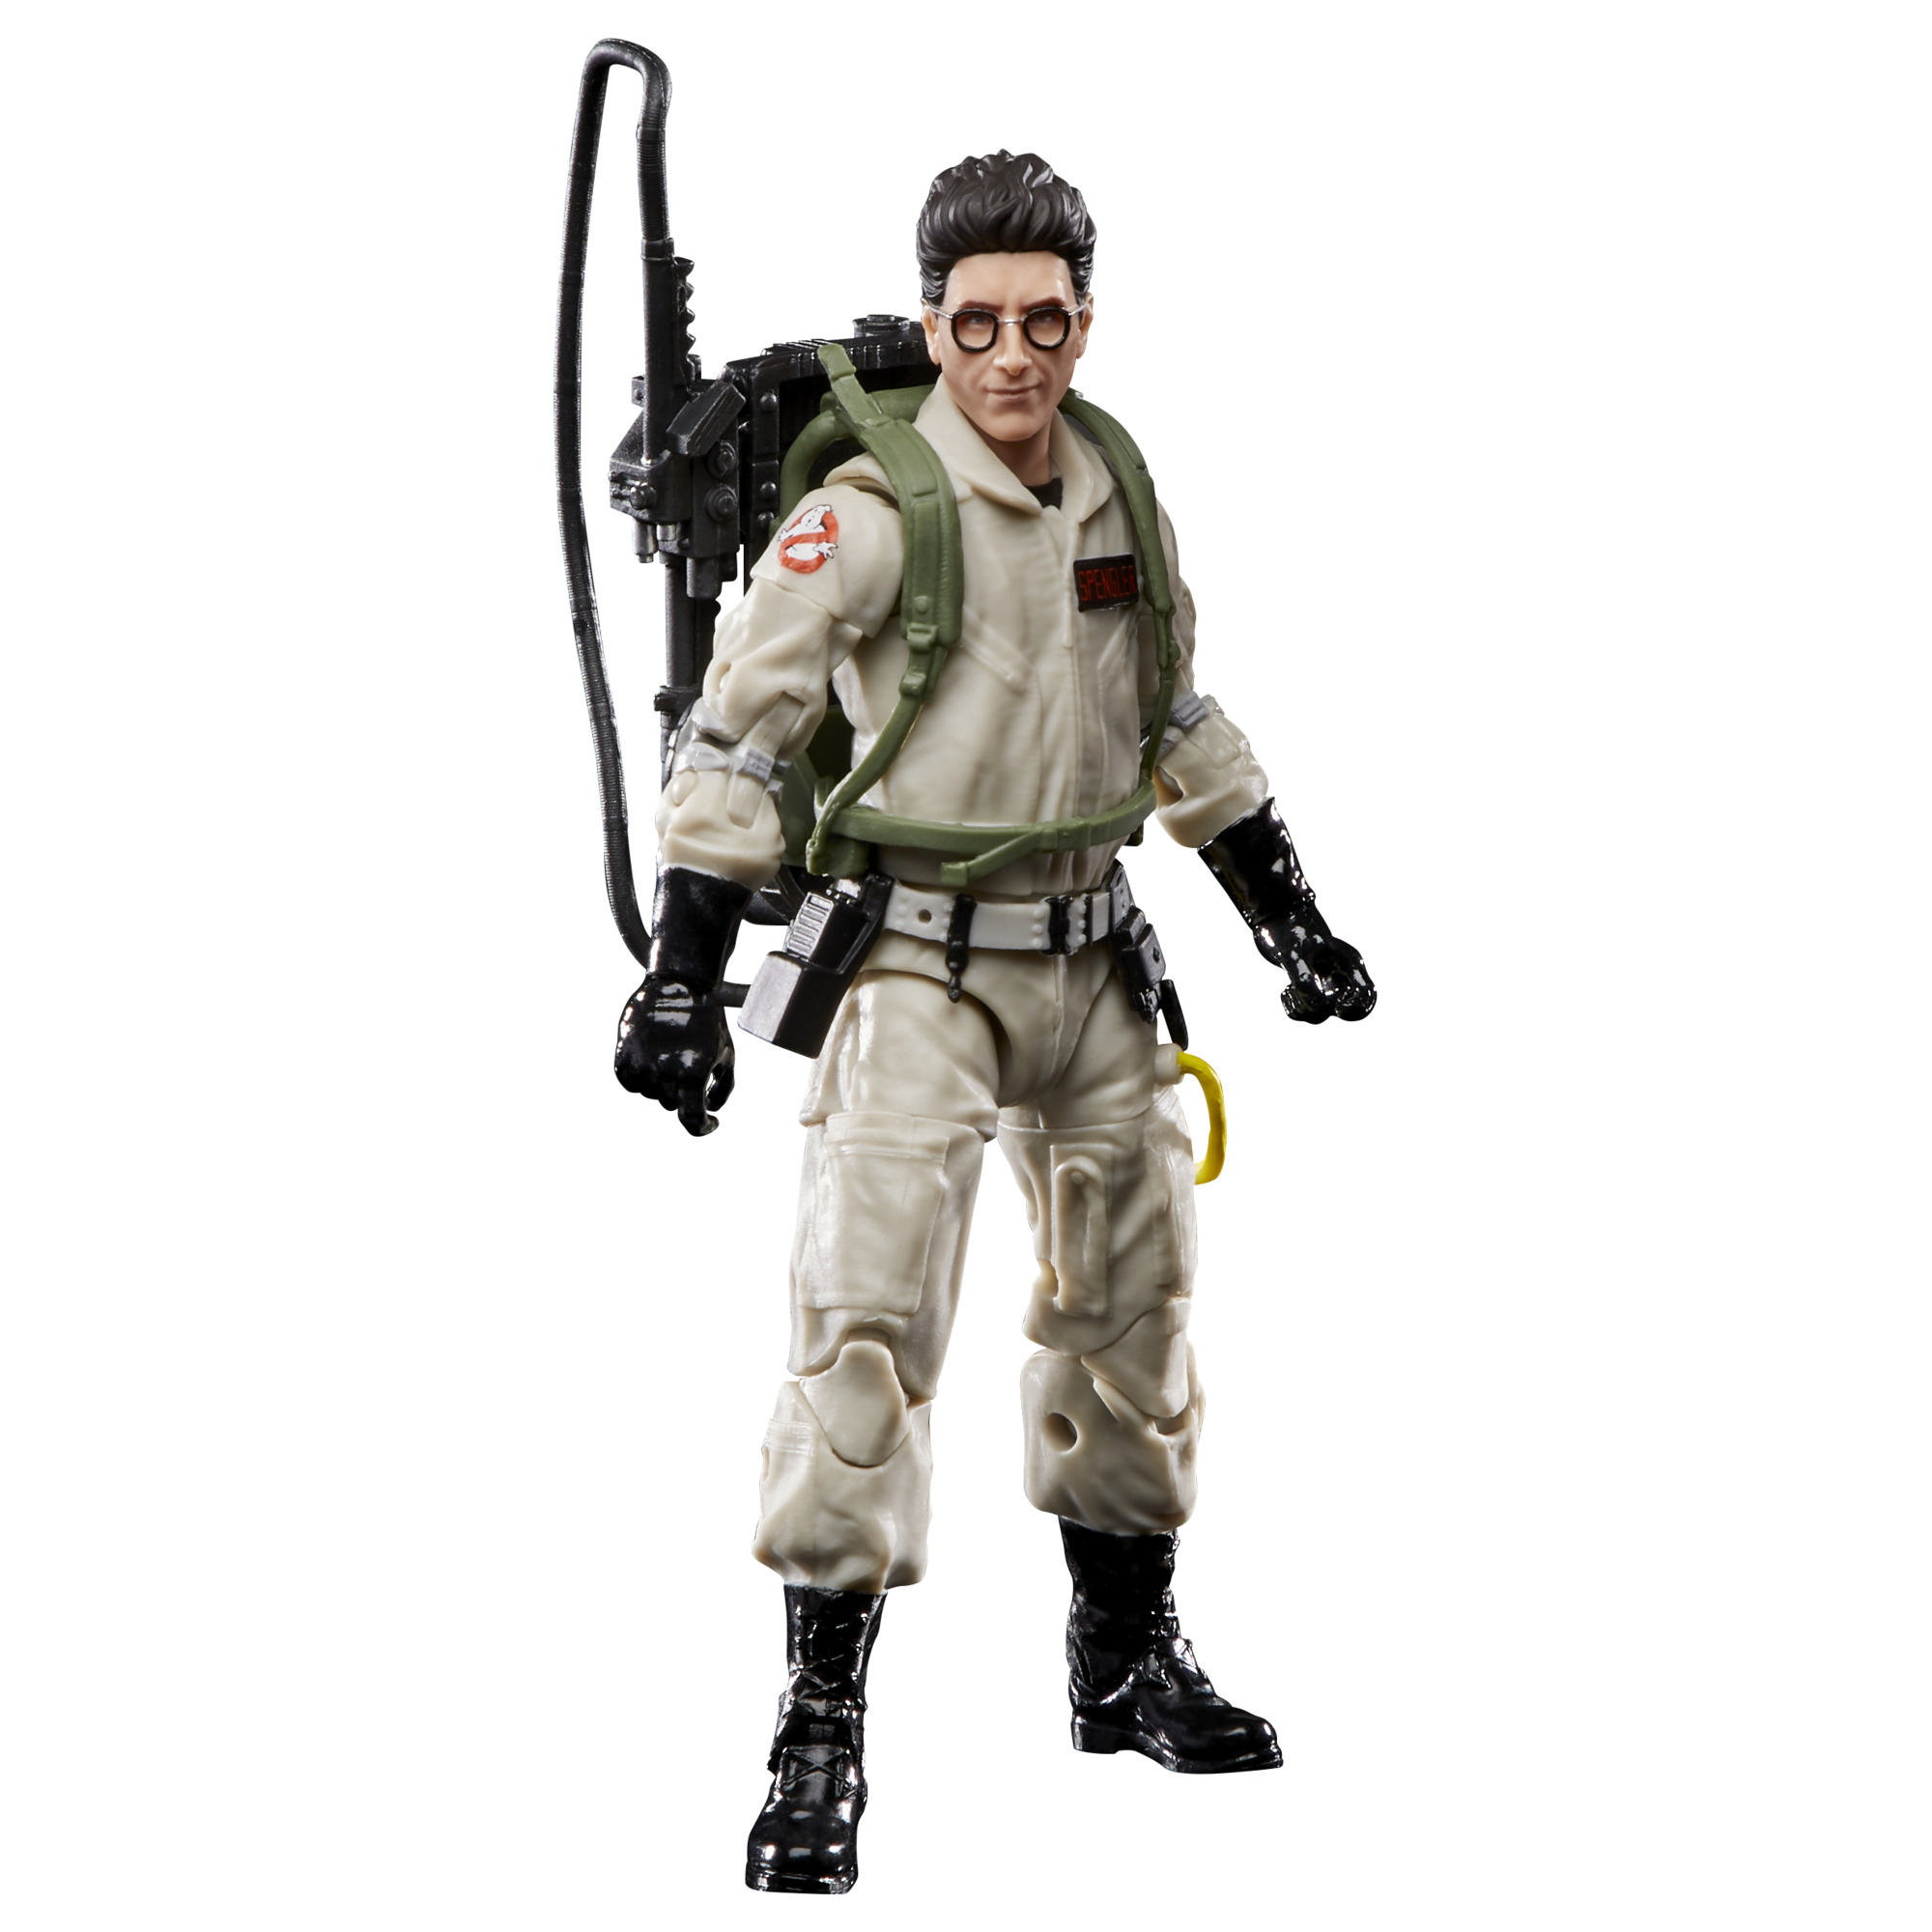 Ghostbusters Plasma Series Egon Spengler Toy 6-Inch-Scale Collectible Classic 1984 Ghostbusters Figure, Kids Ages 4 and Up